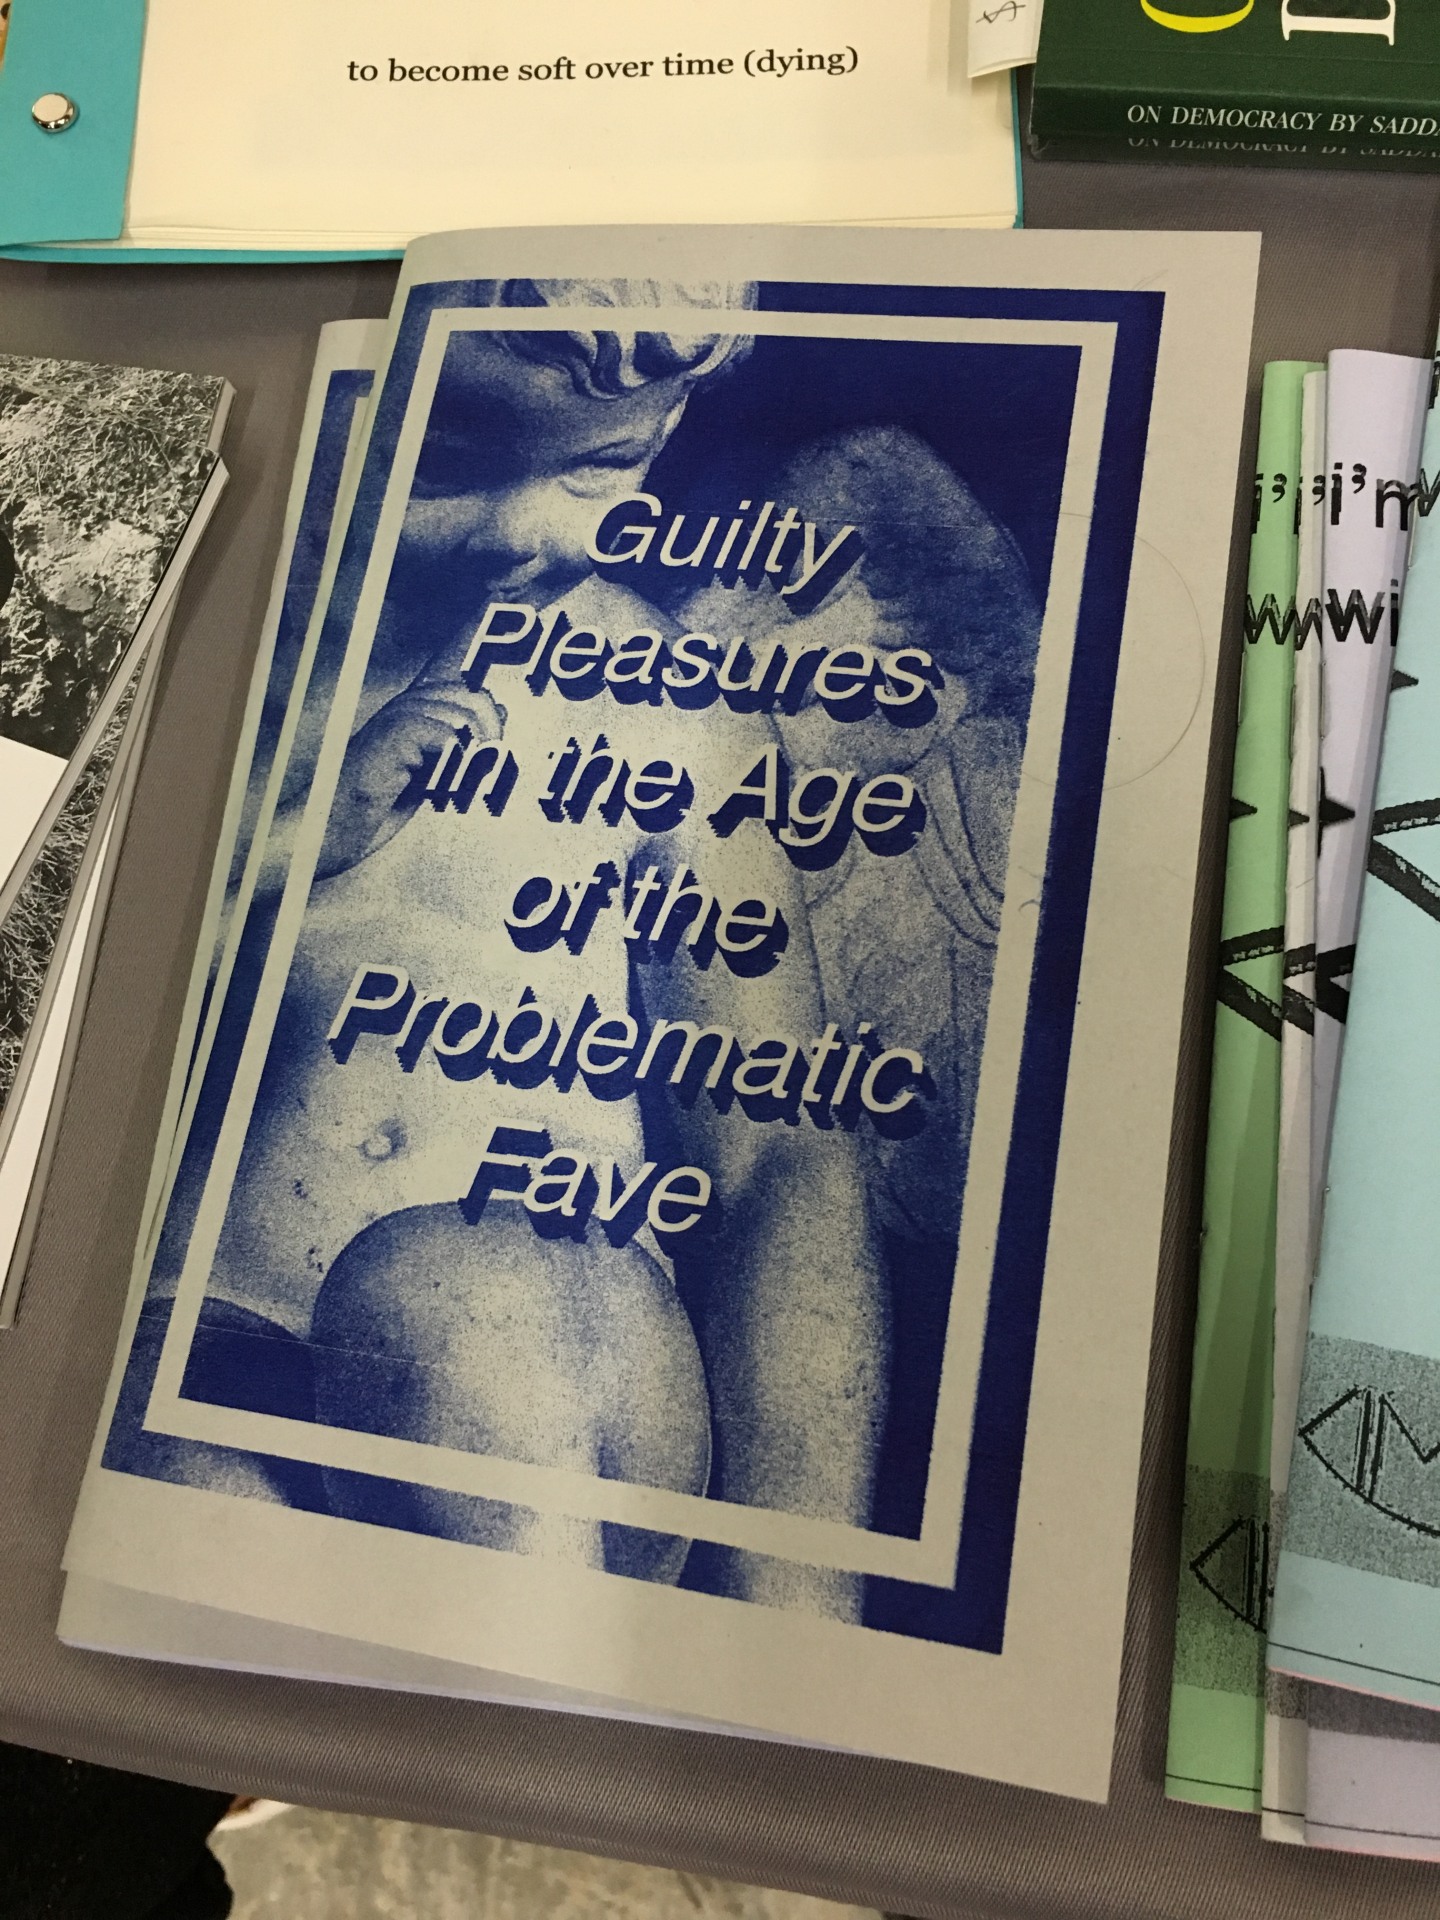 21 things you need to touch with your hands at this year’s New York Art Book Fair